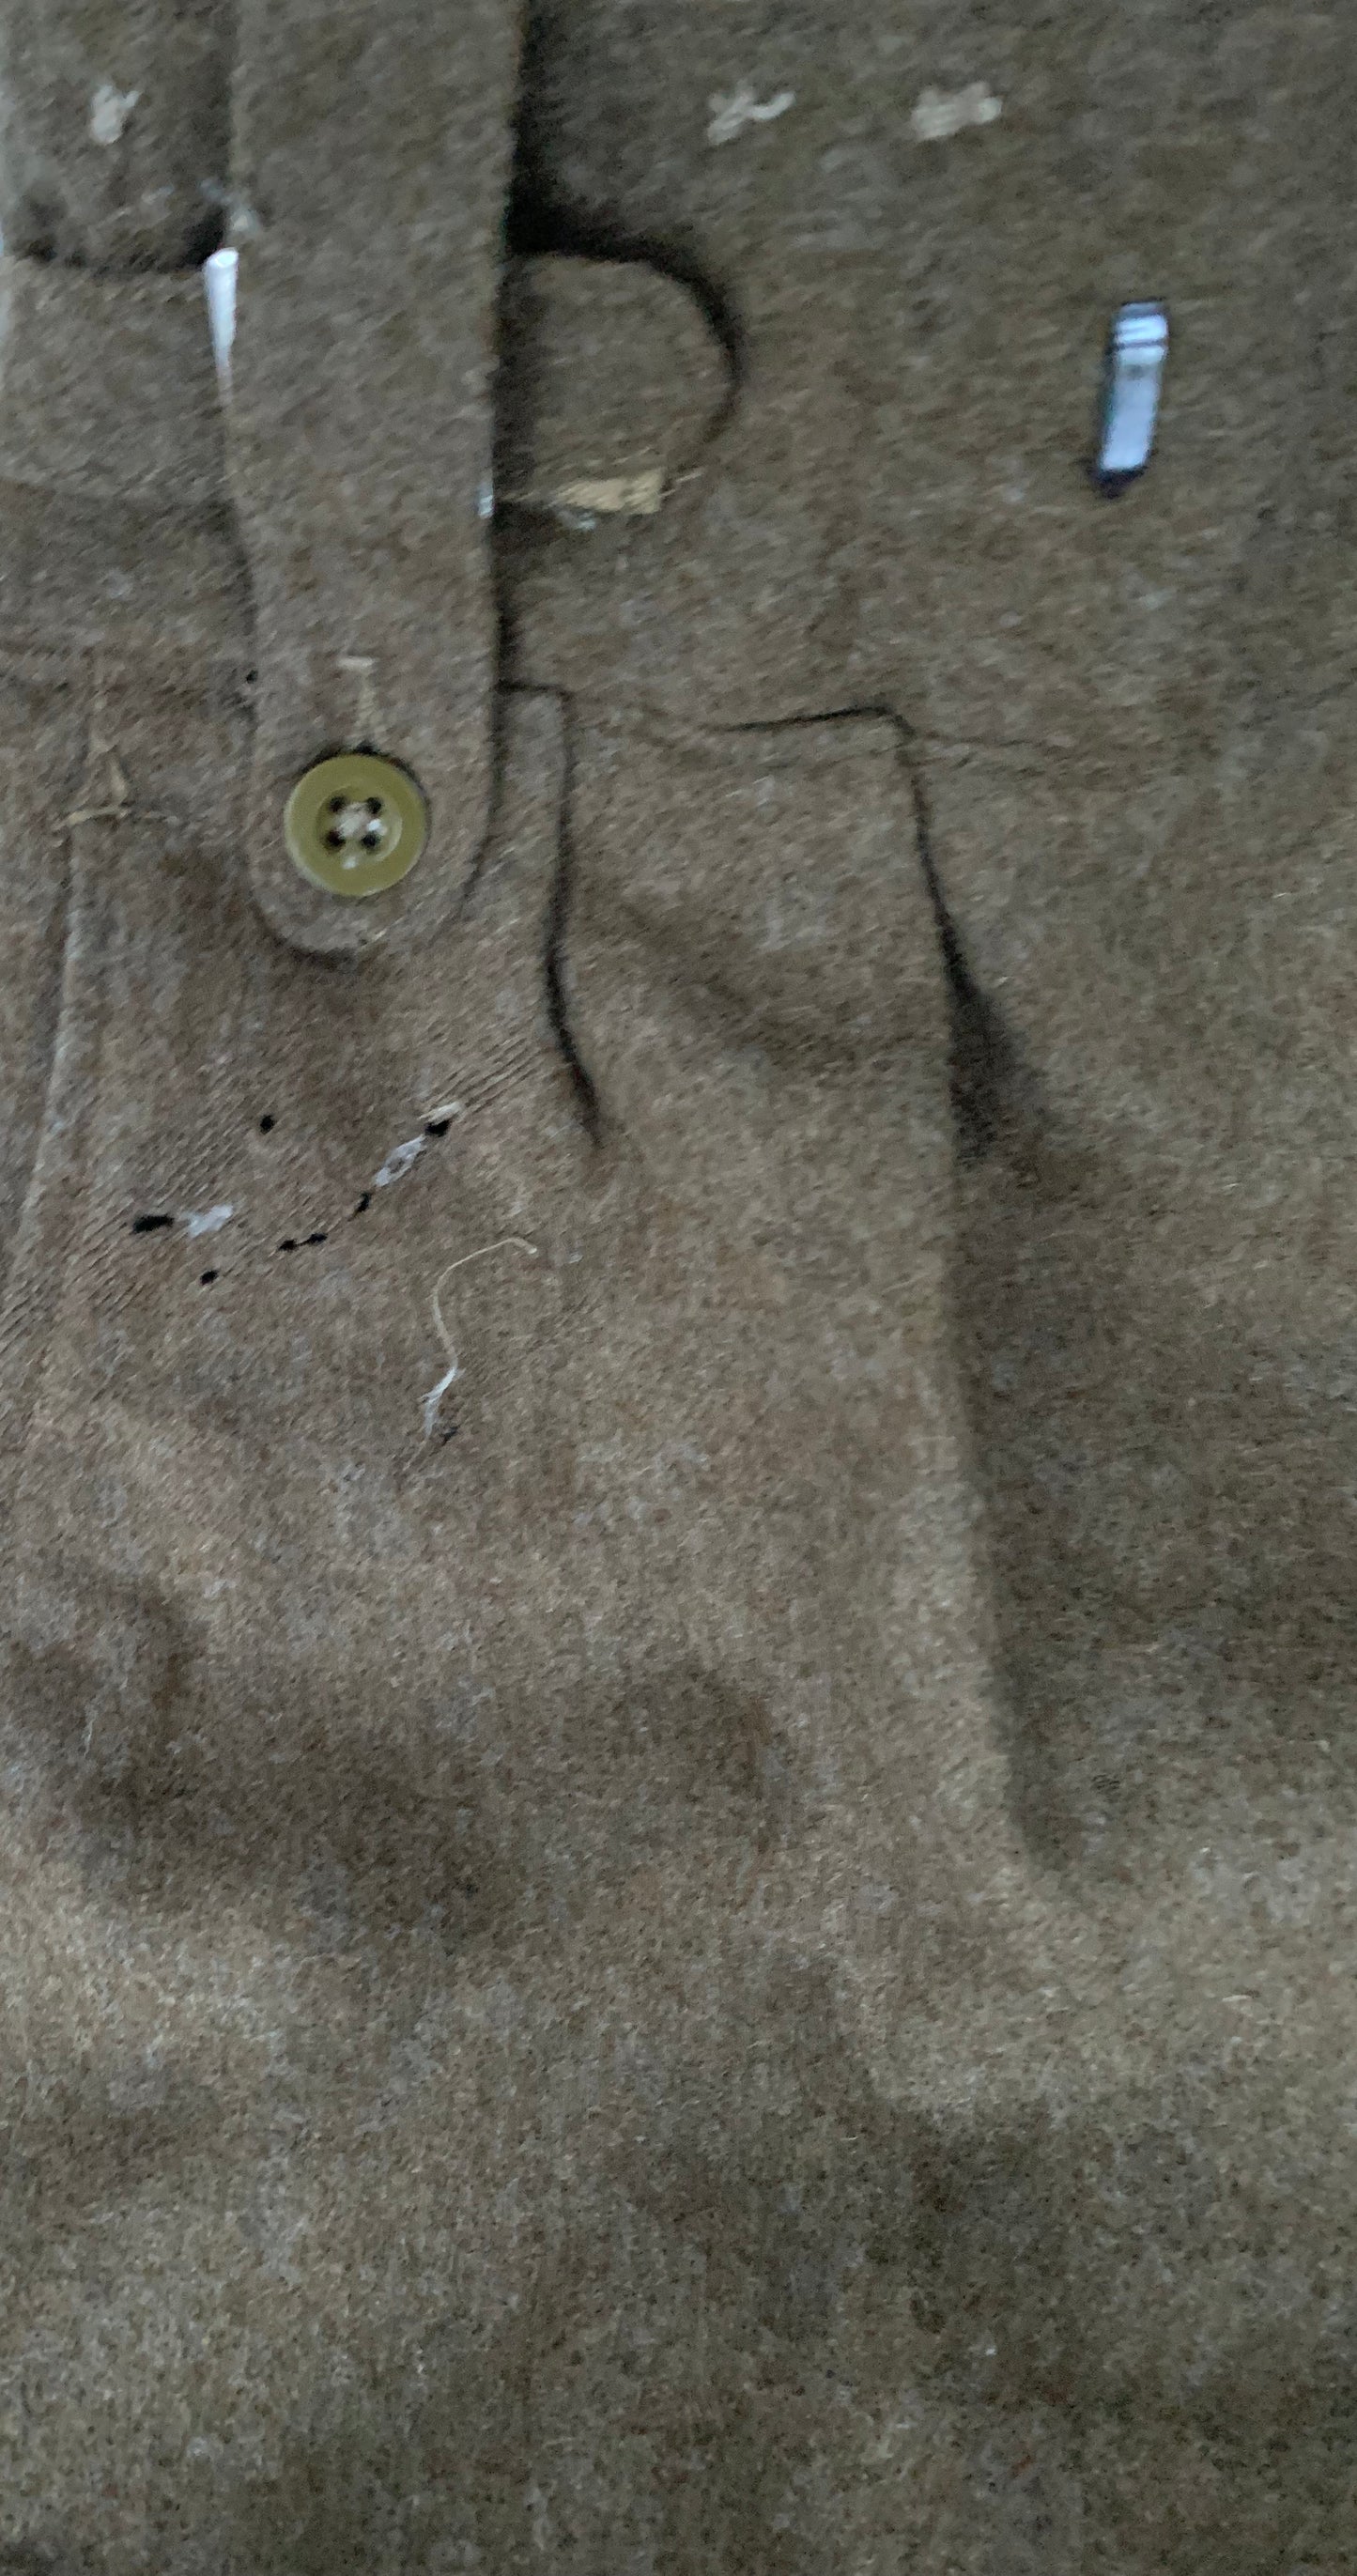 British Battledress Trousers to Captain W. Goodenough